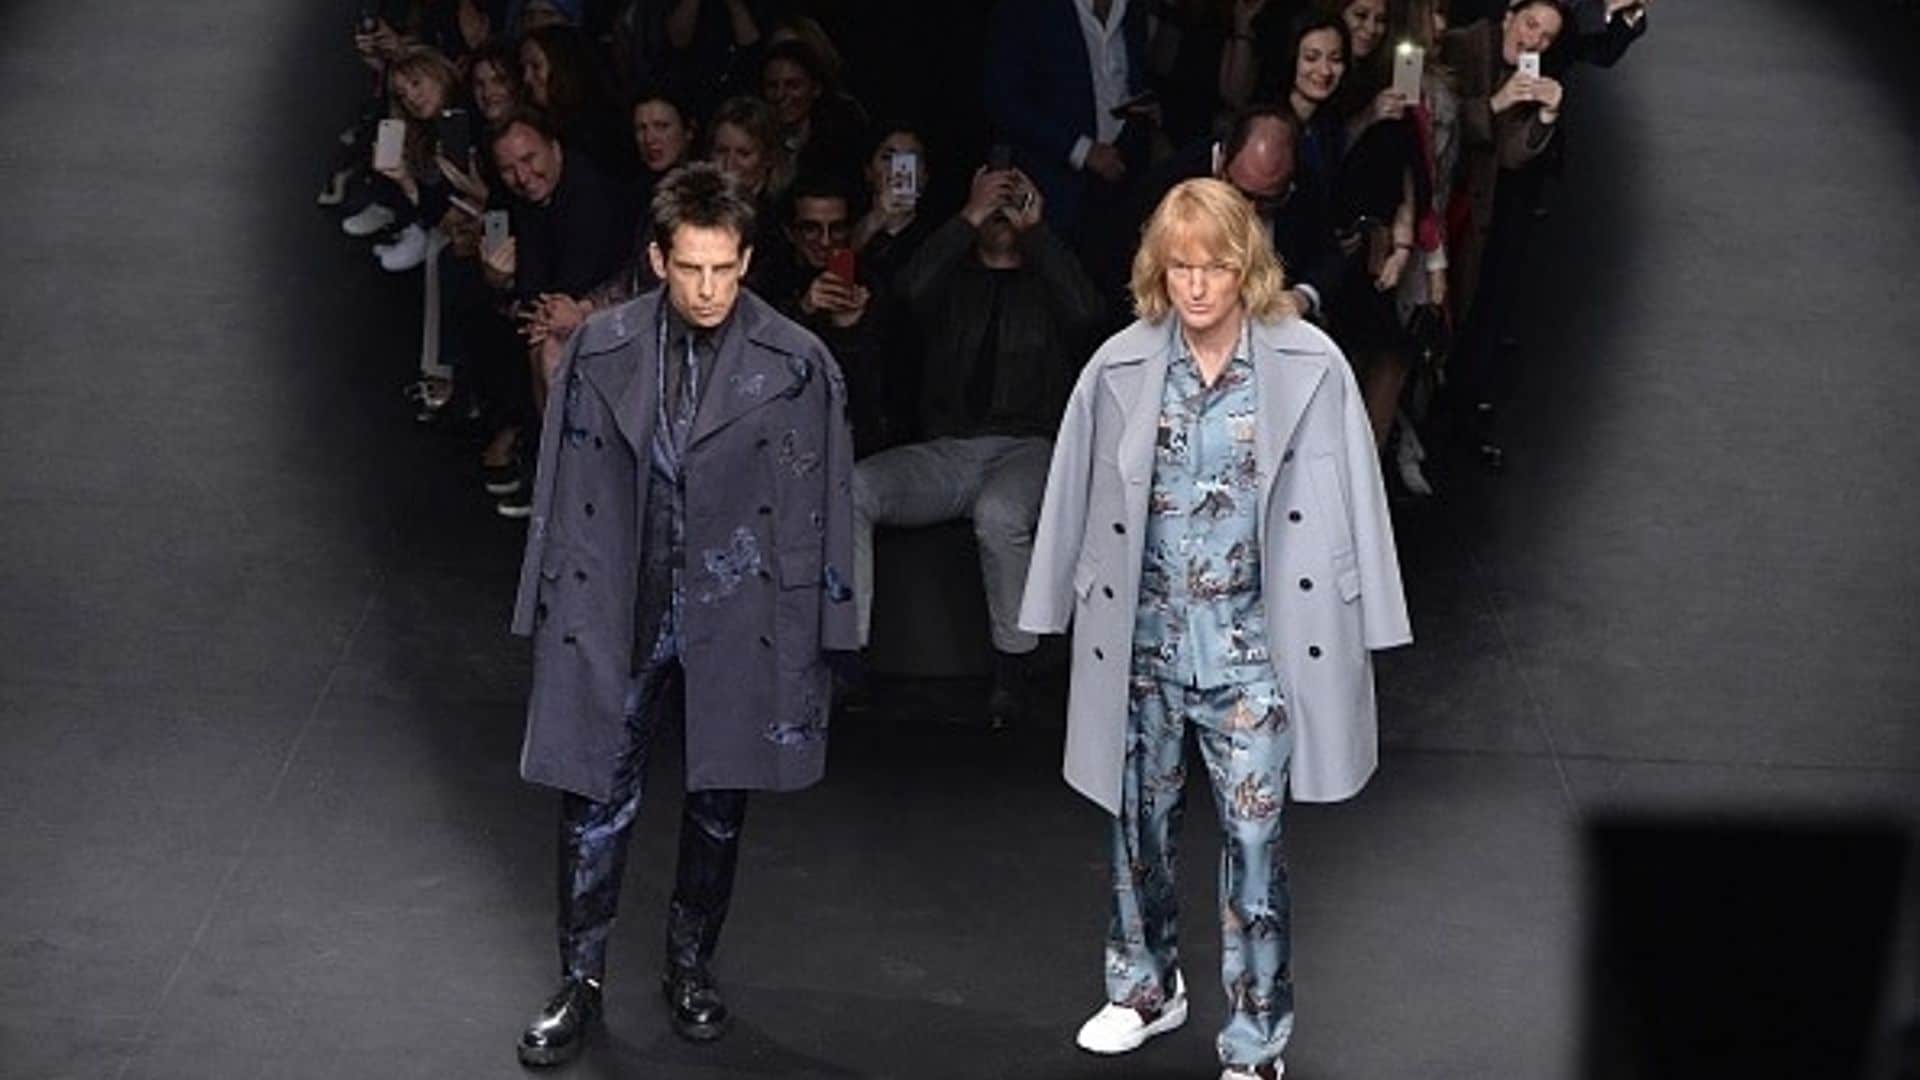 5 things you need to know about 'Zoolander 2'